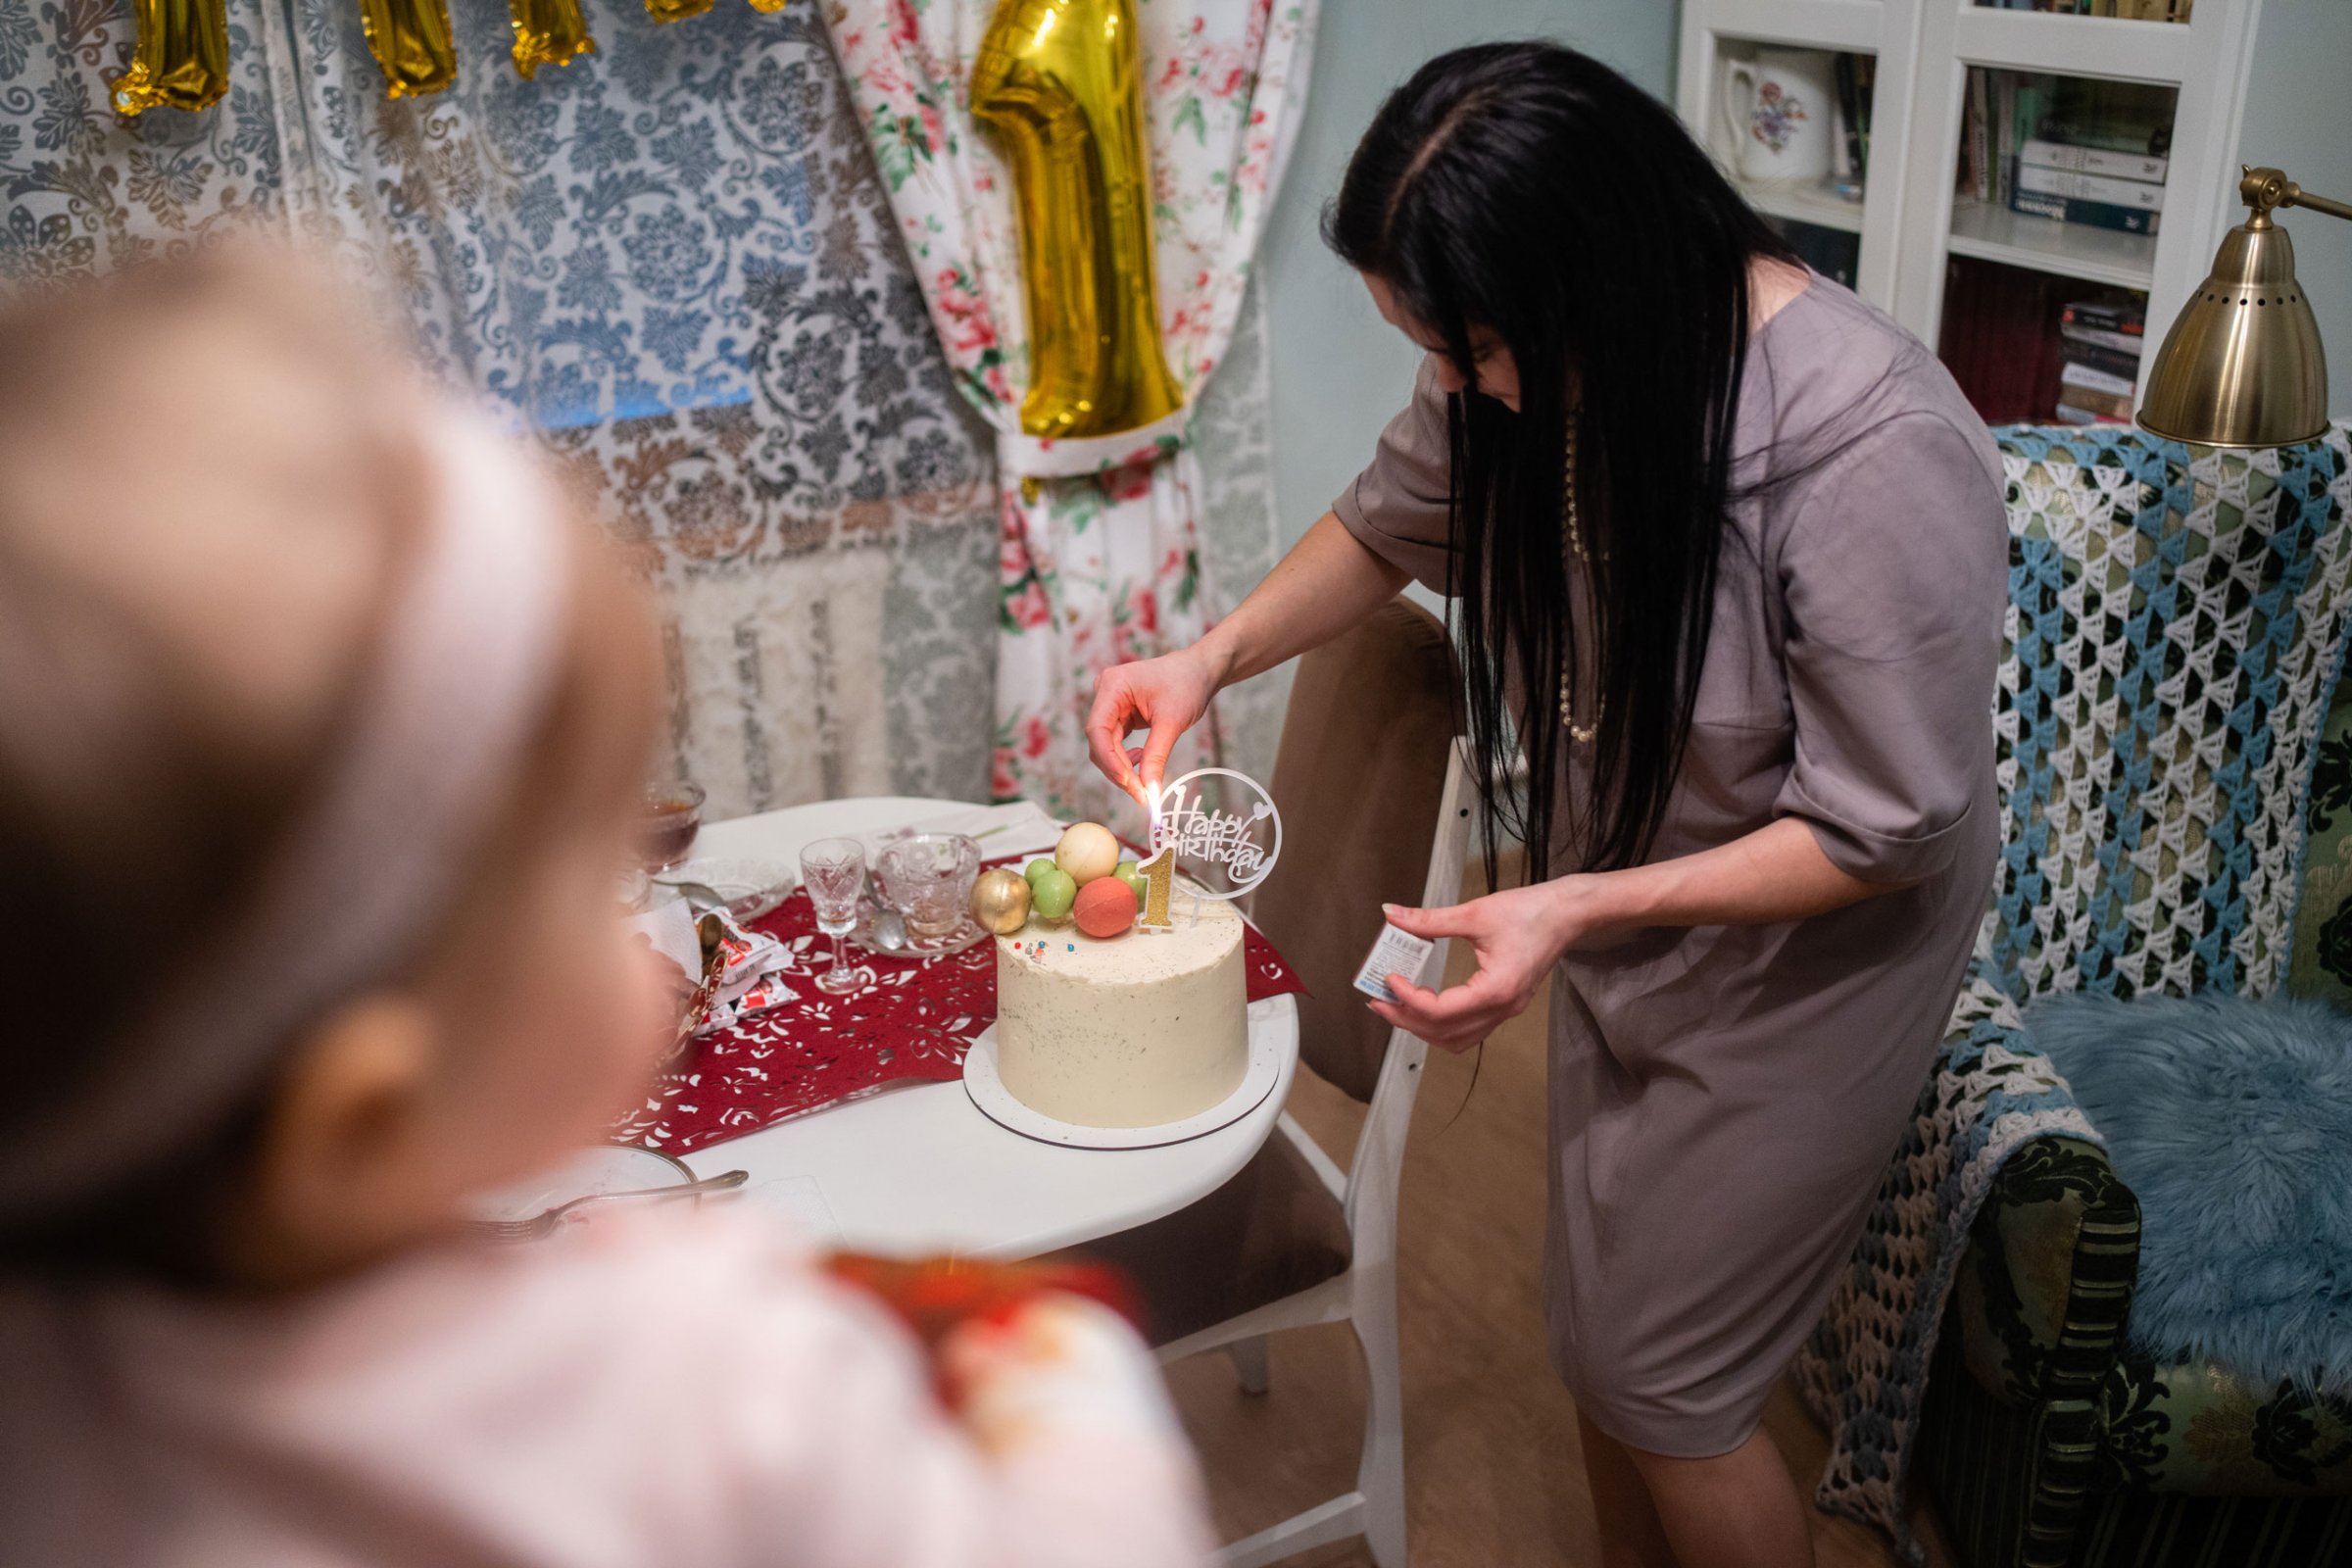 Nina lights a candle for her daughter Yulia’s 1st birthday cake